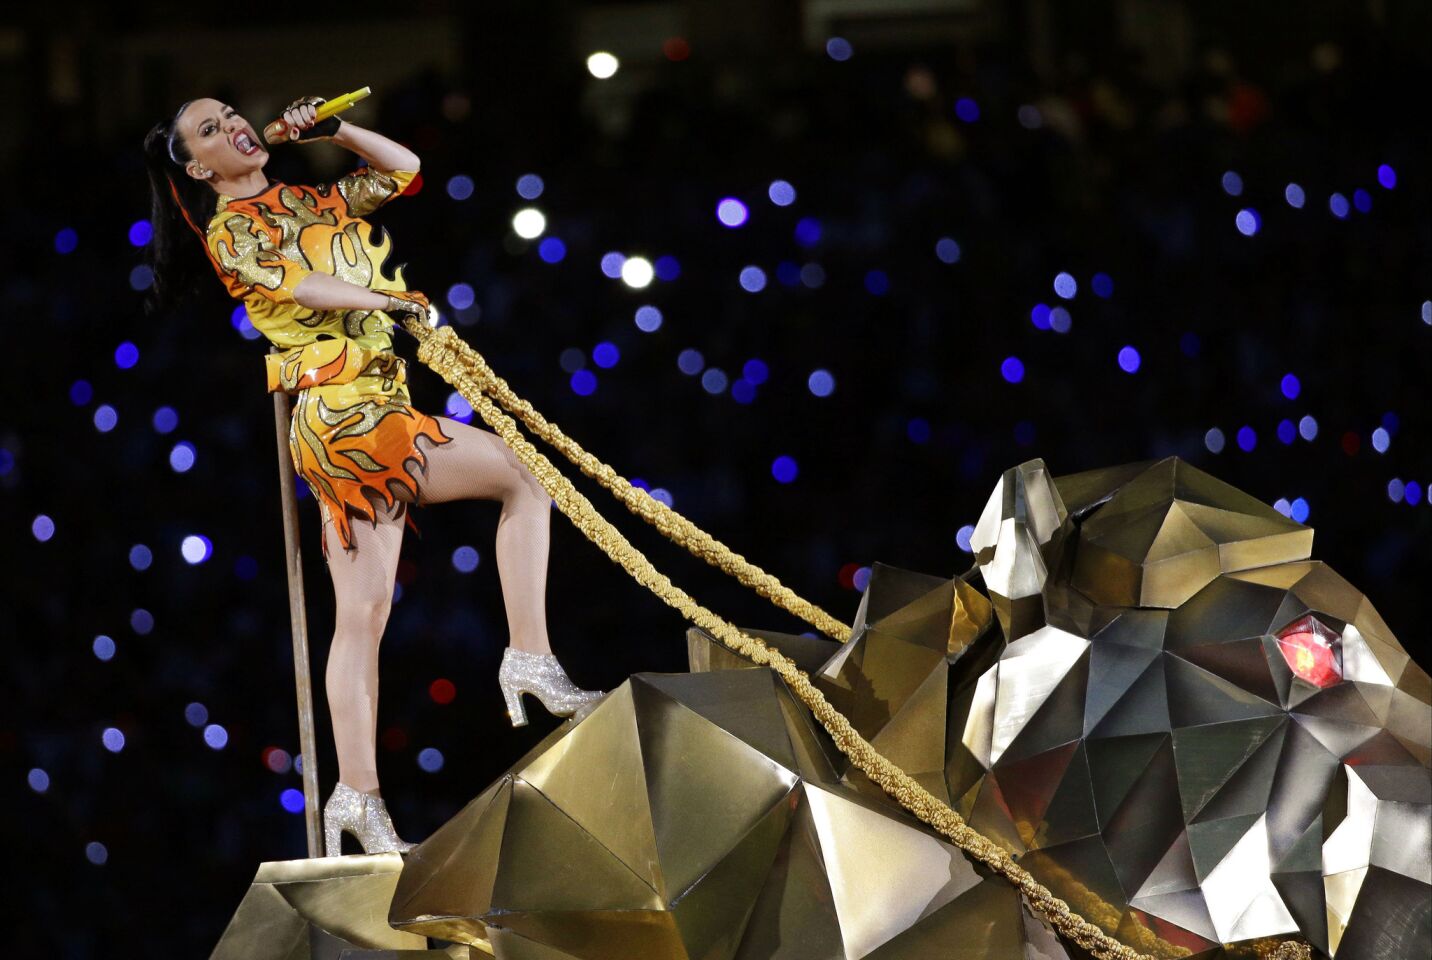 Katy Perry opens halftime of NFL Super Bowl XLIX between the Seattle Seahawks and the New England Patriots with the song "Roar."